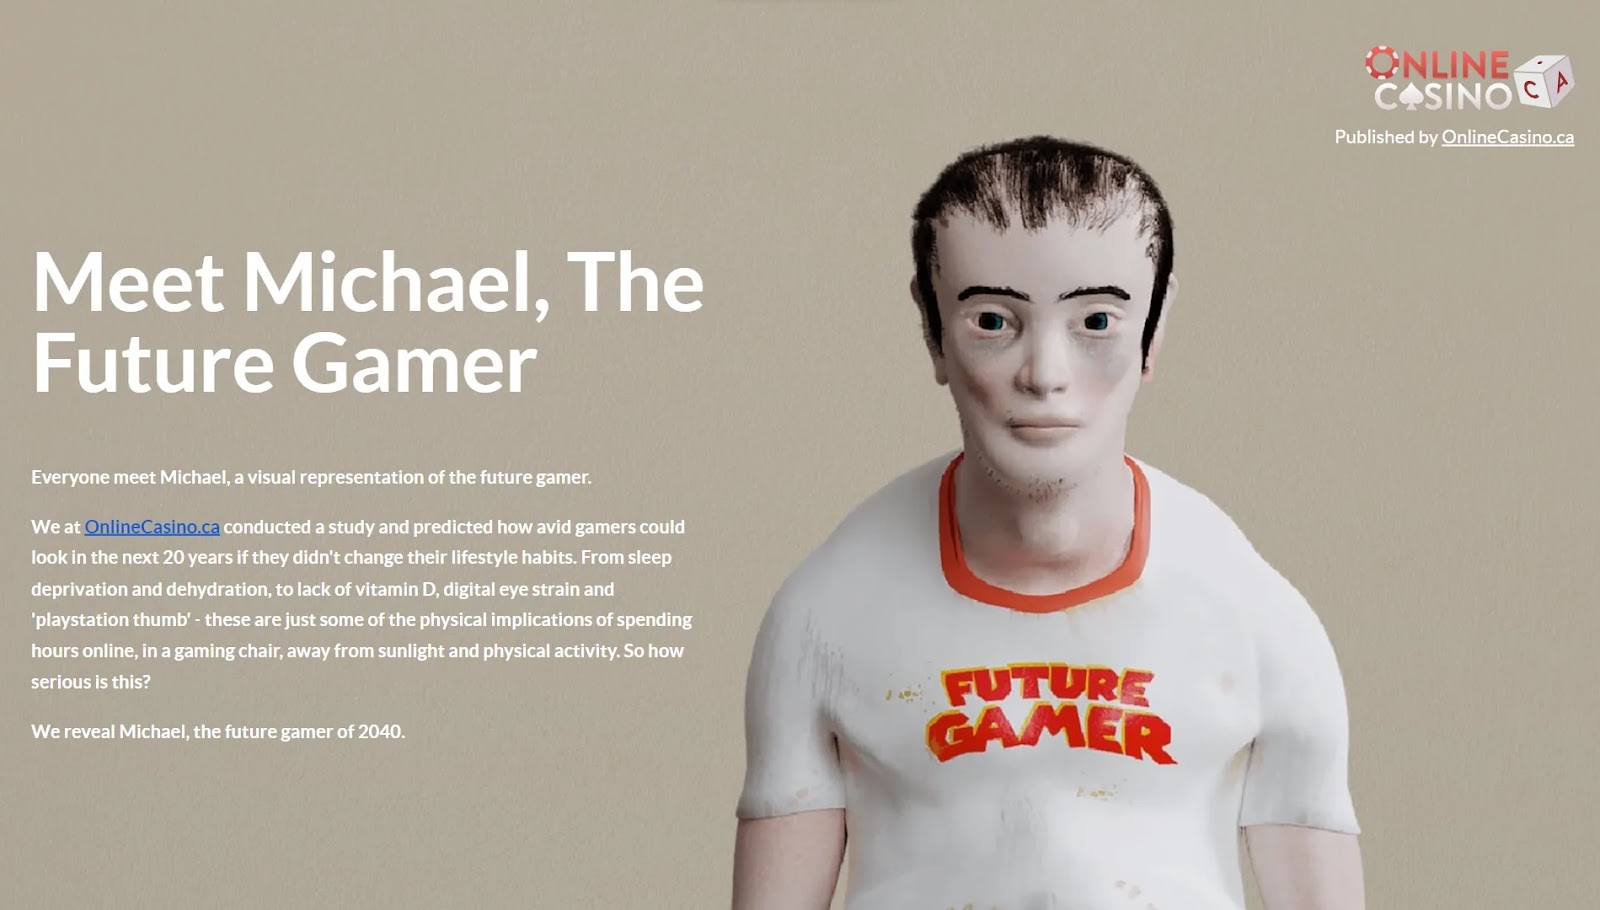 The Future Gamer campaign by OnlineCasino.ca landing page